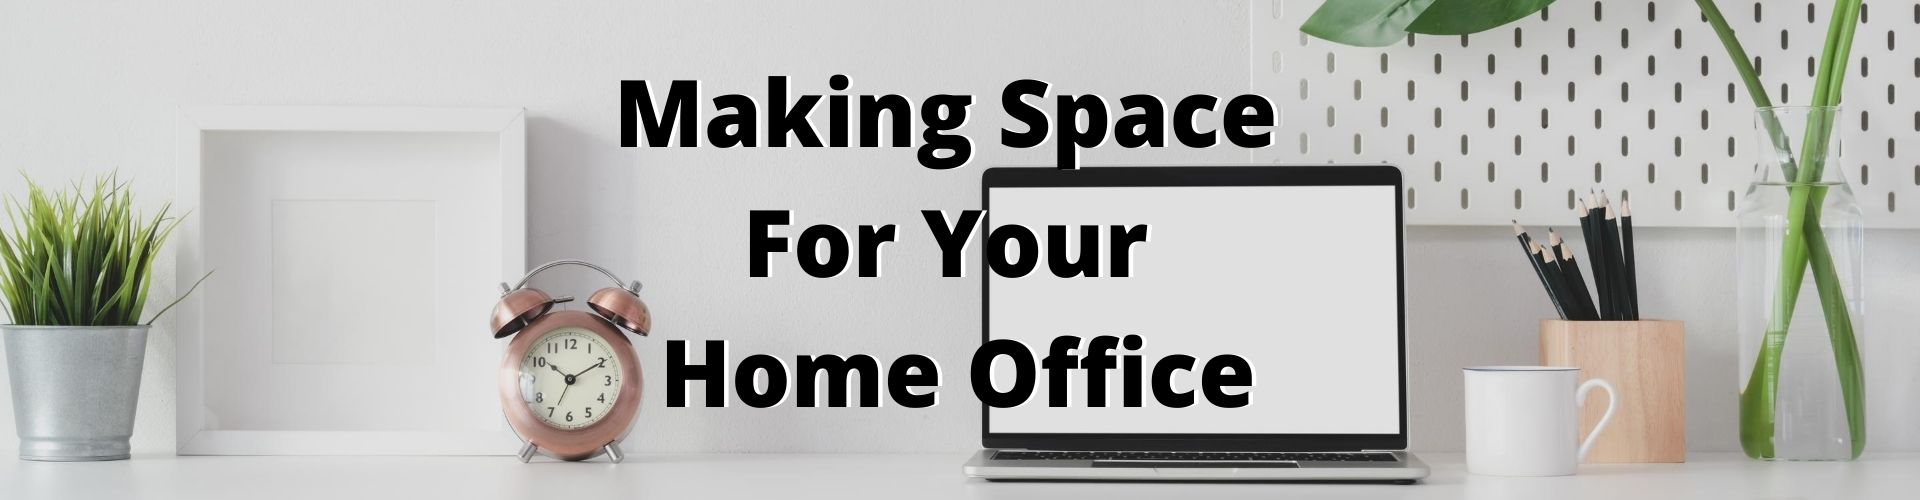 Making Space For Your Home Office